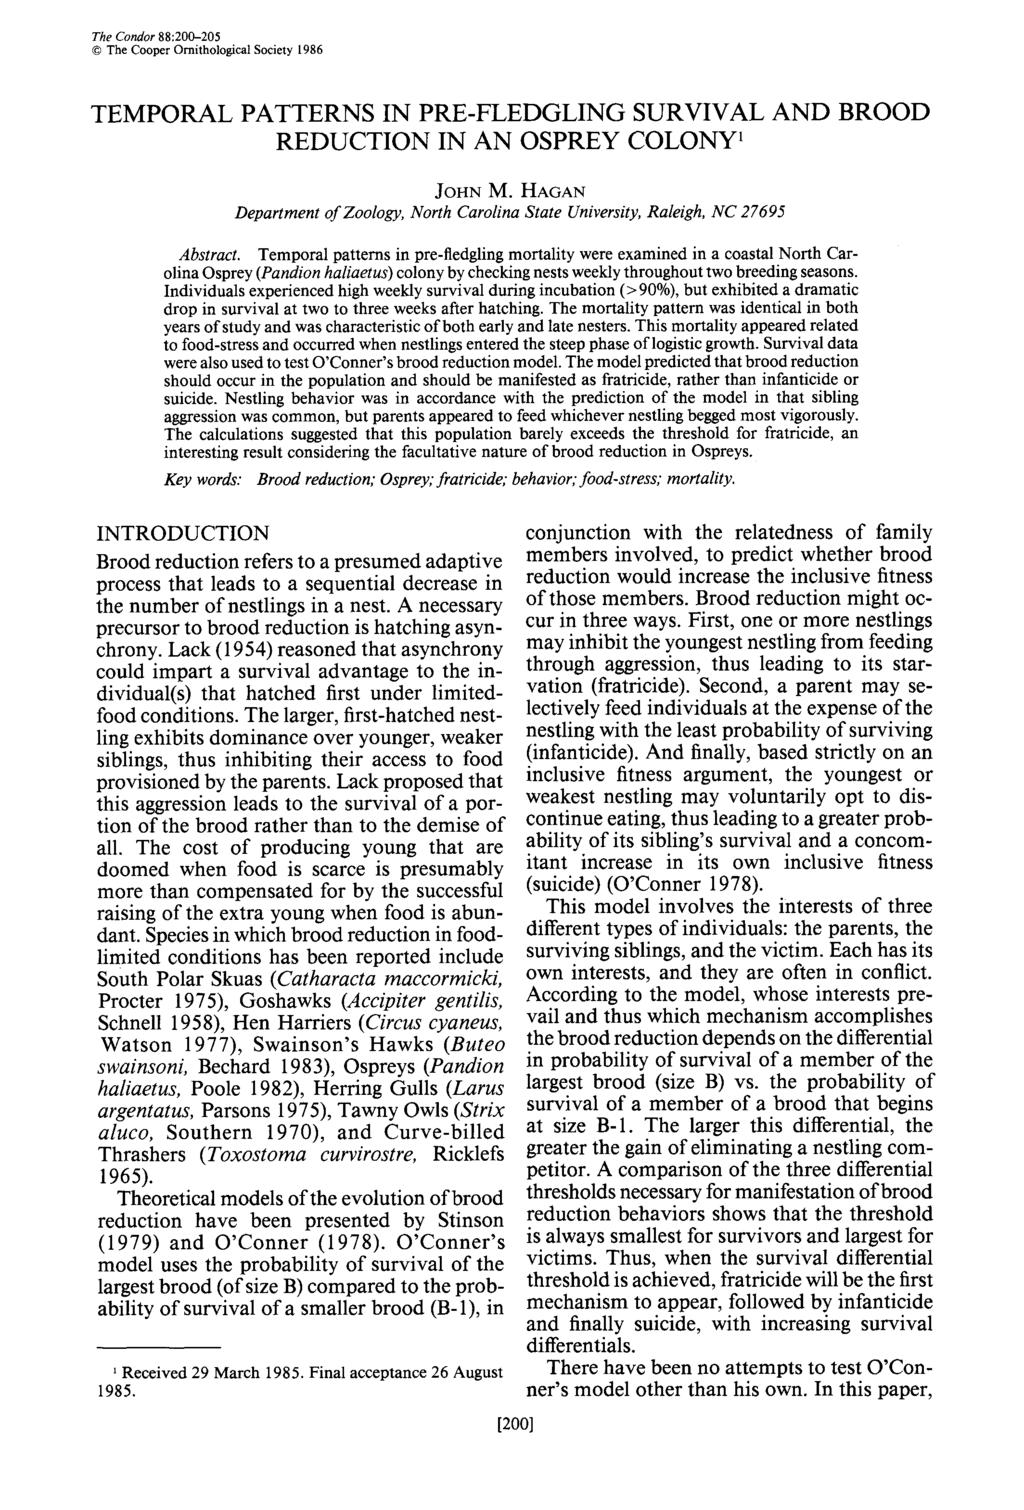 TheCondor88:200-205 0 The Cooper Ornithological Society 1986 TEMPORAL PATTERNS IN PRE-FLEDGLING SURVIVAL AND BROOD REDUCTION IN AN OSPREY COLONY JOHN M.